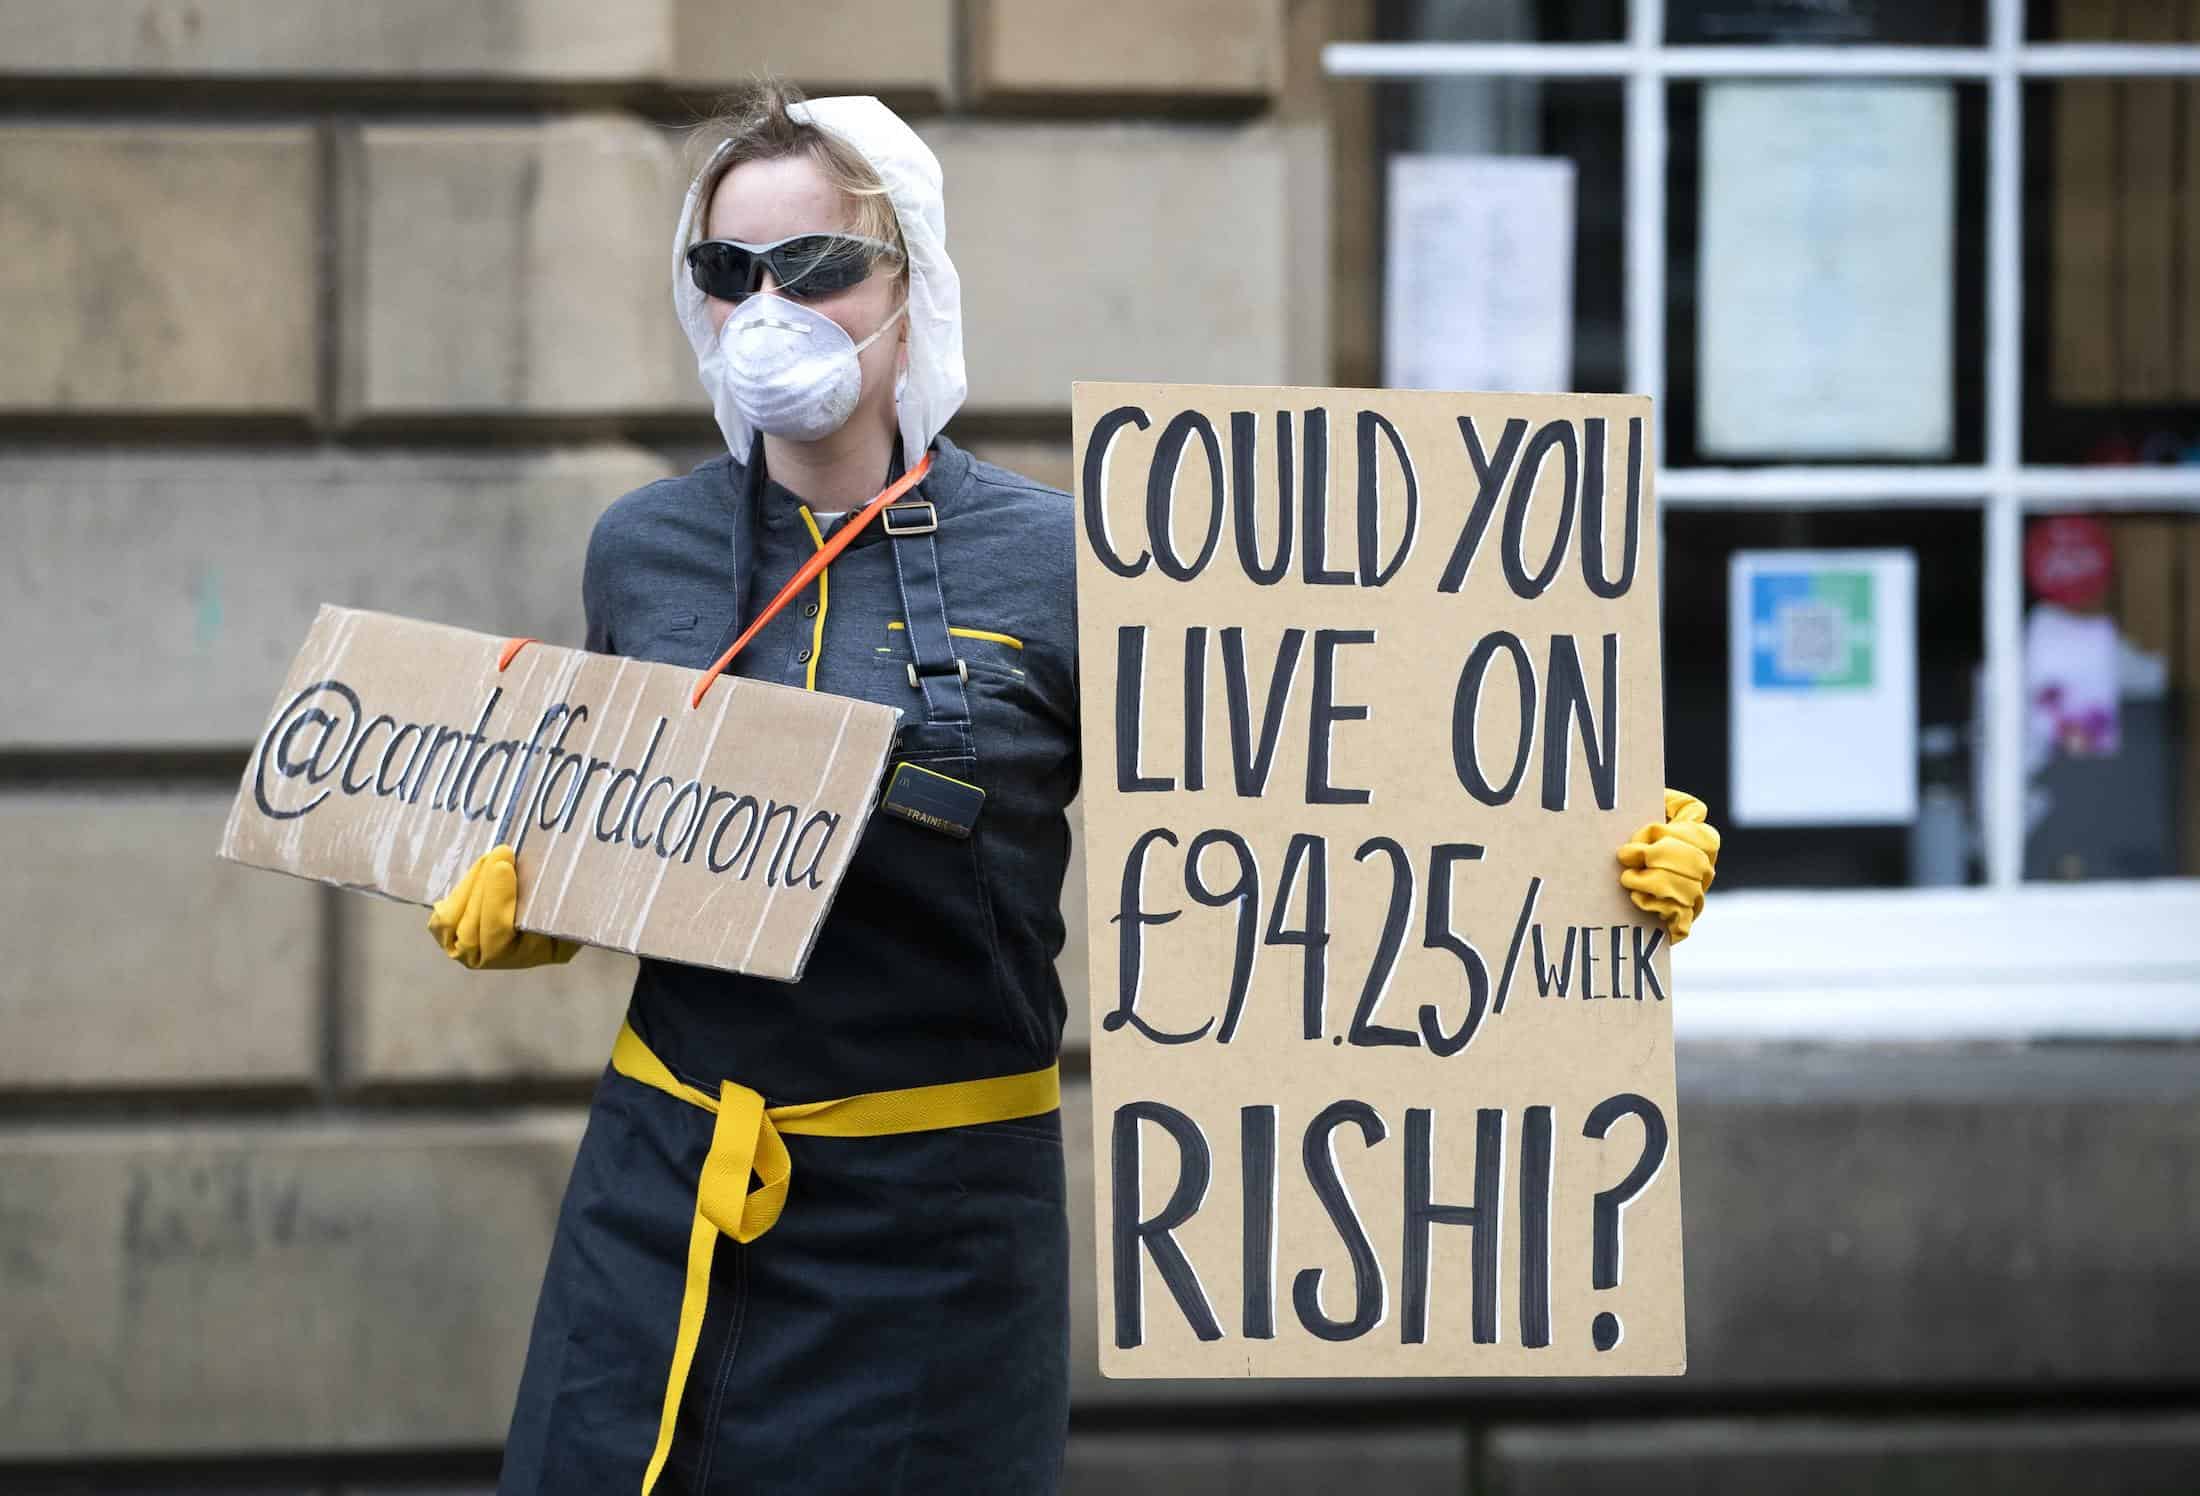 ‘Could you live on £94.25 a week Rishi?’ Low sick pay stopping workers from self-isolating